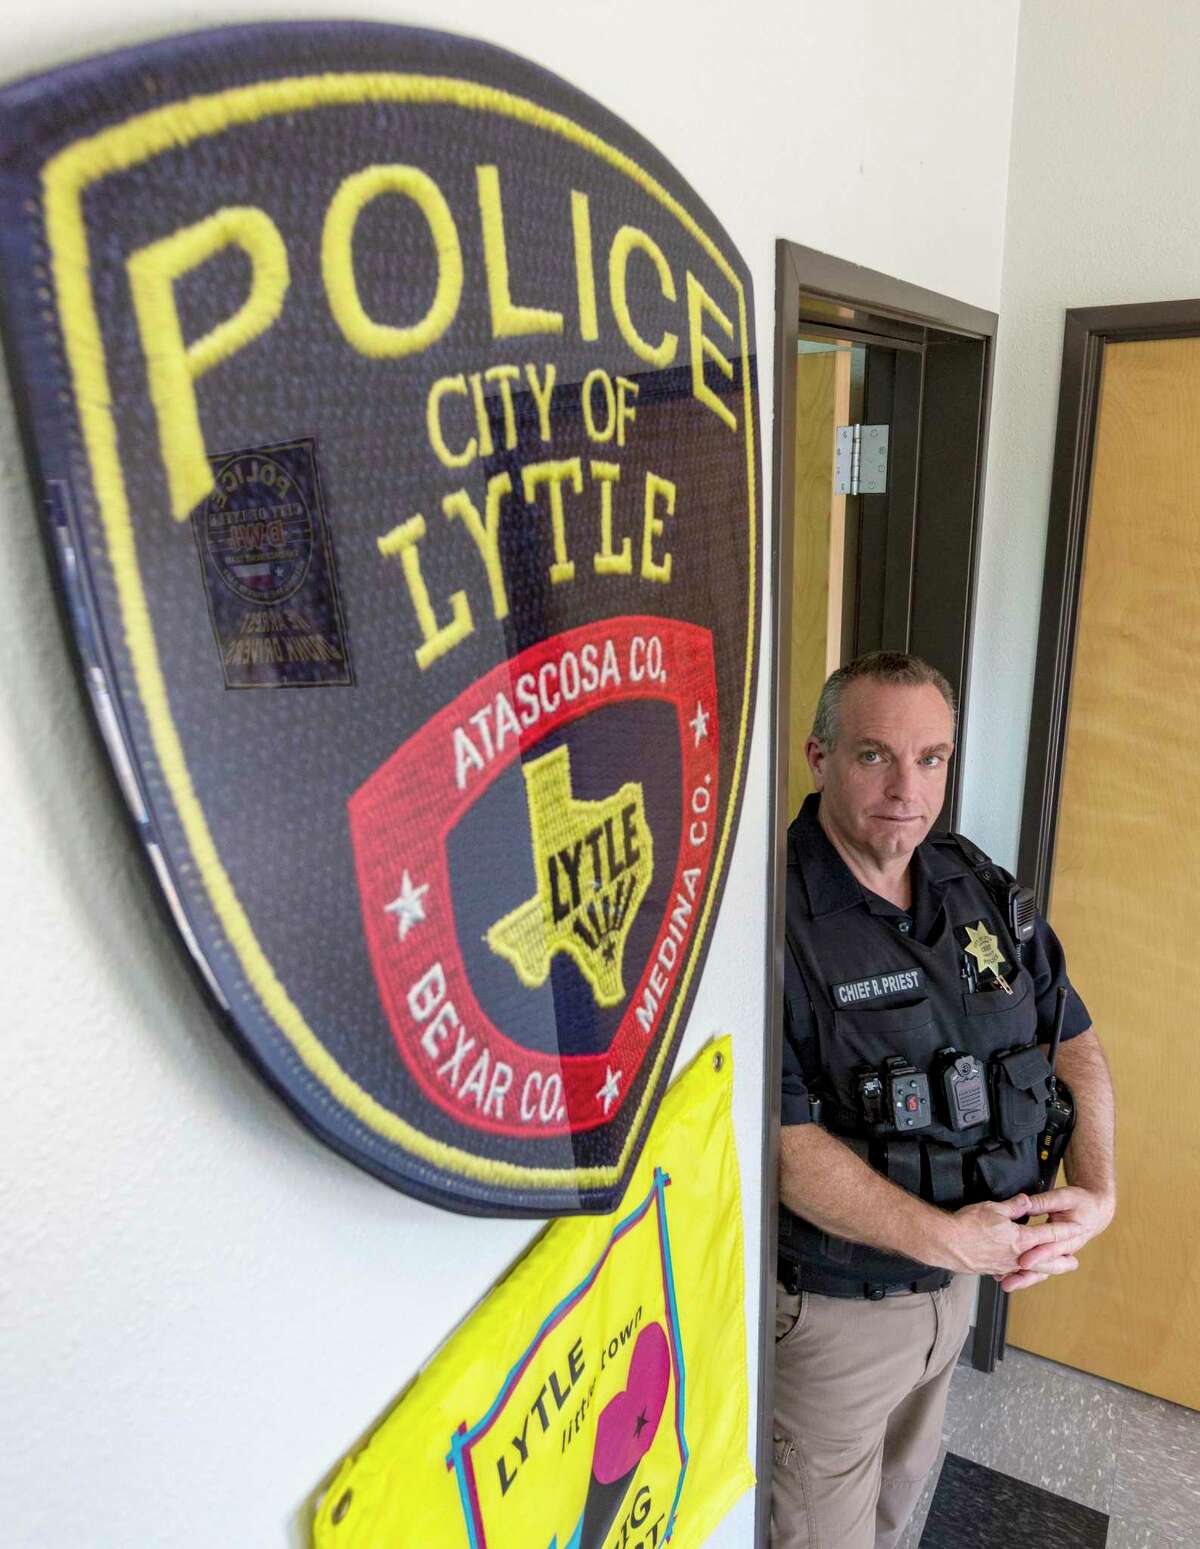 People appreciate the humor and sane approach of Lytle Police Chief Richard 